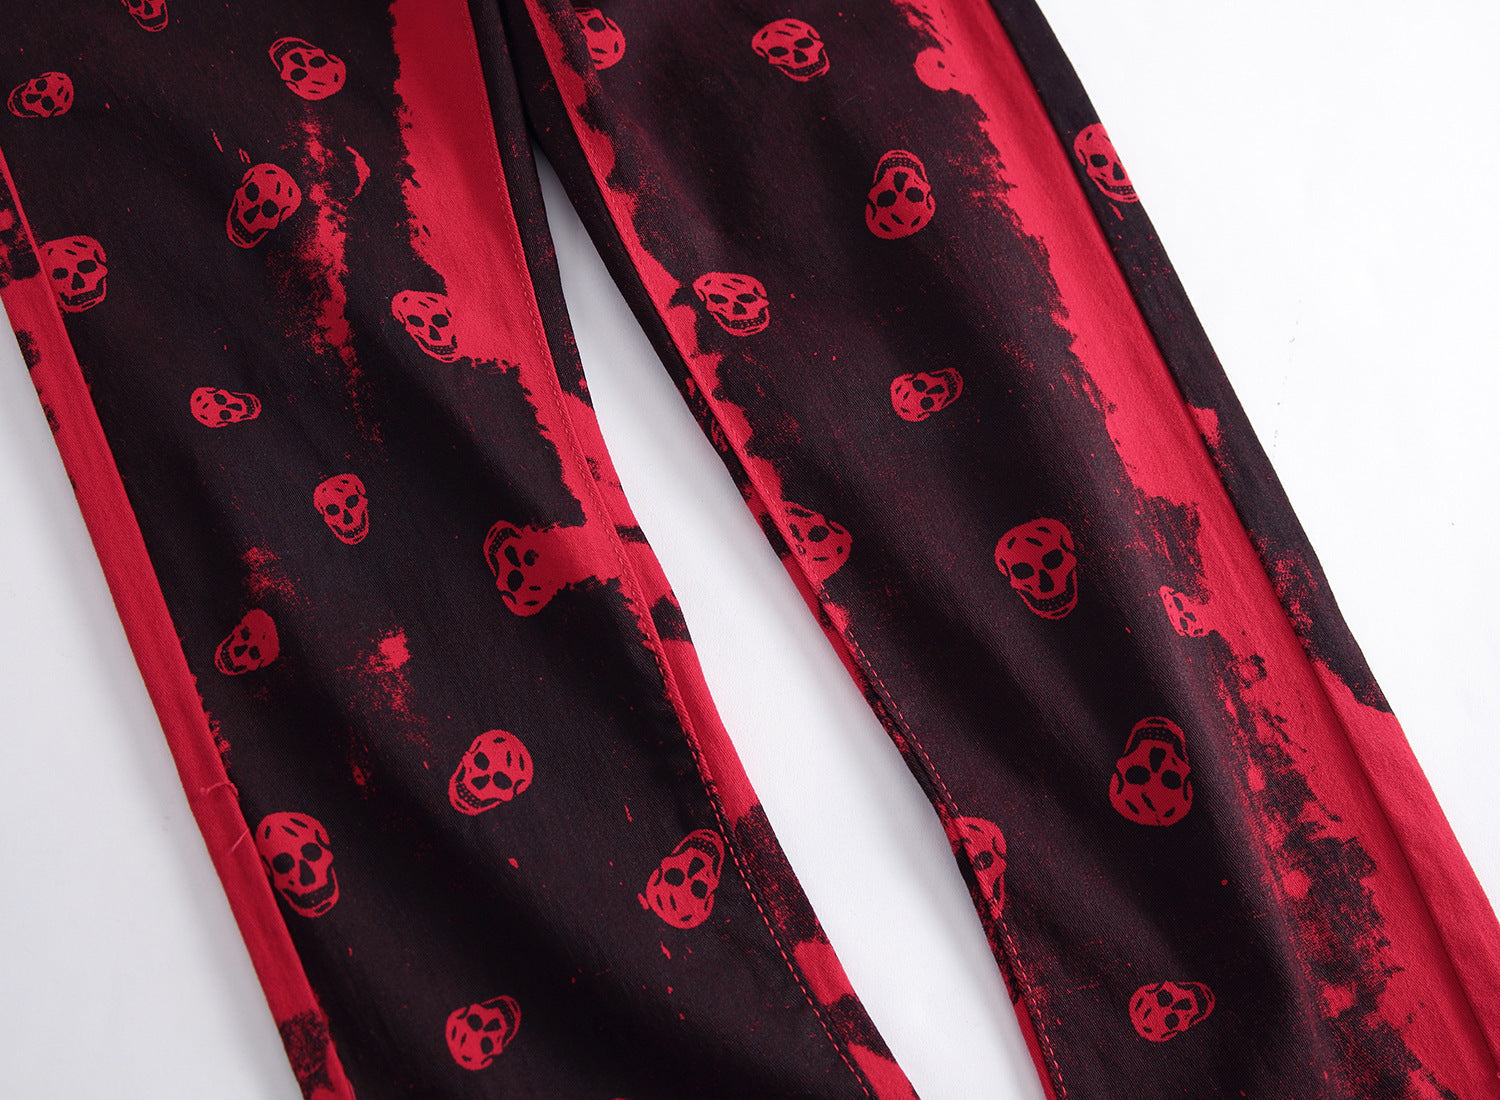 Skull Printed Solid Red Jeans | GlamzLife